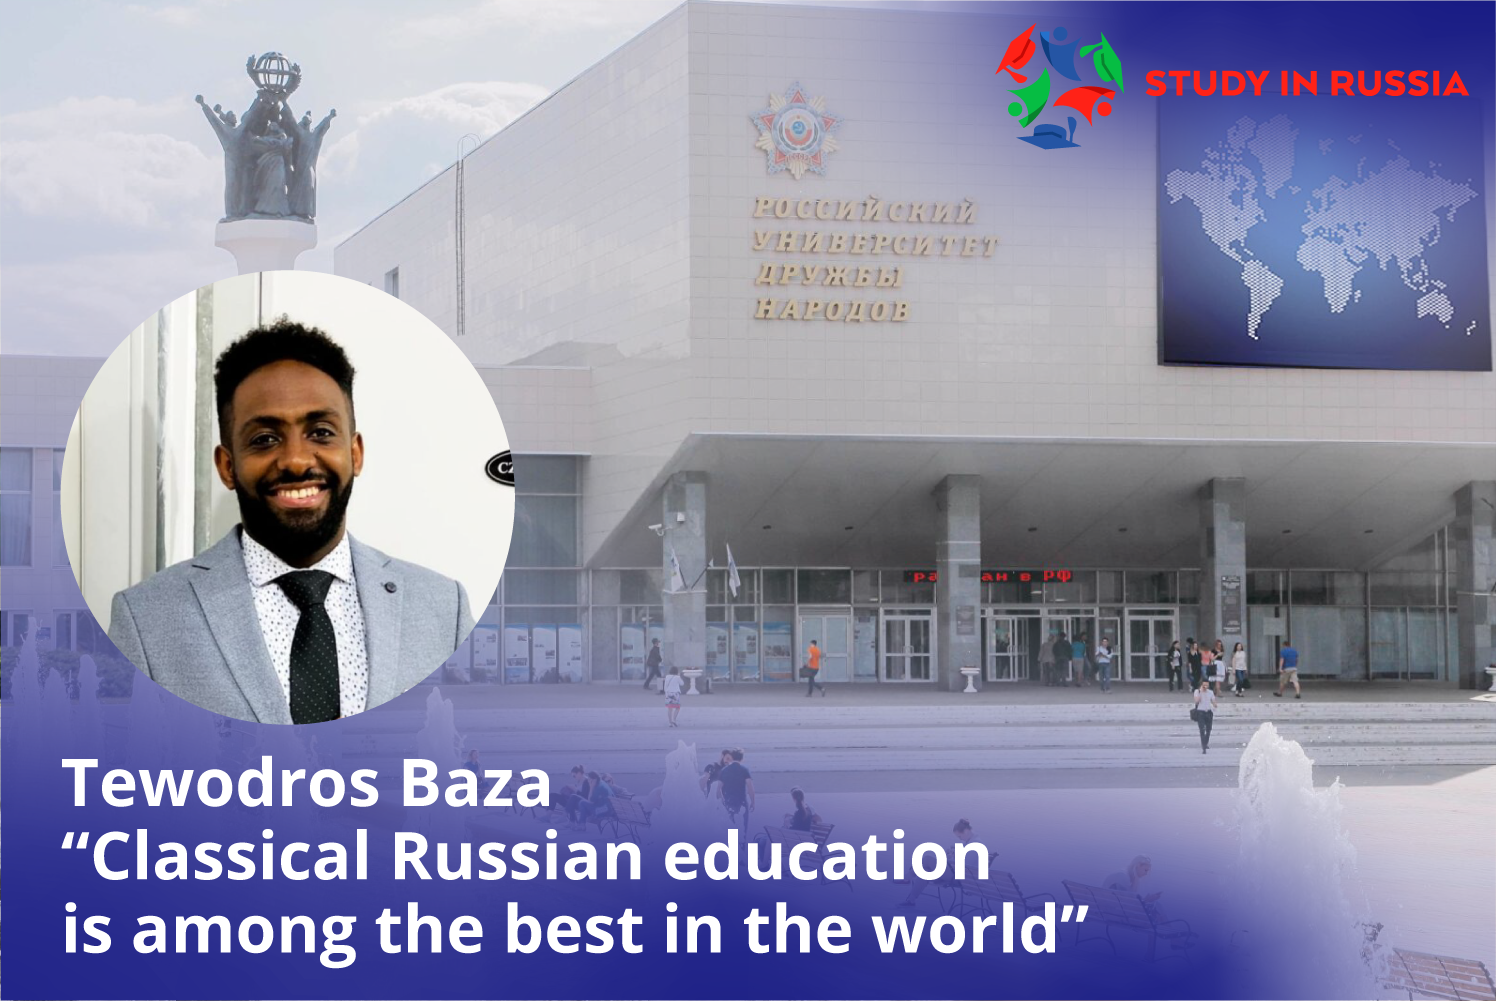 Classical Russian education is among the best in the world, - Tewodros Baza says